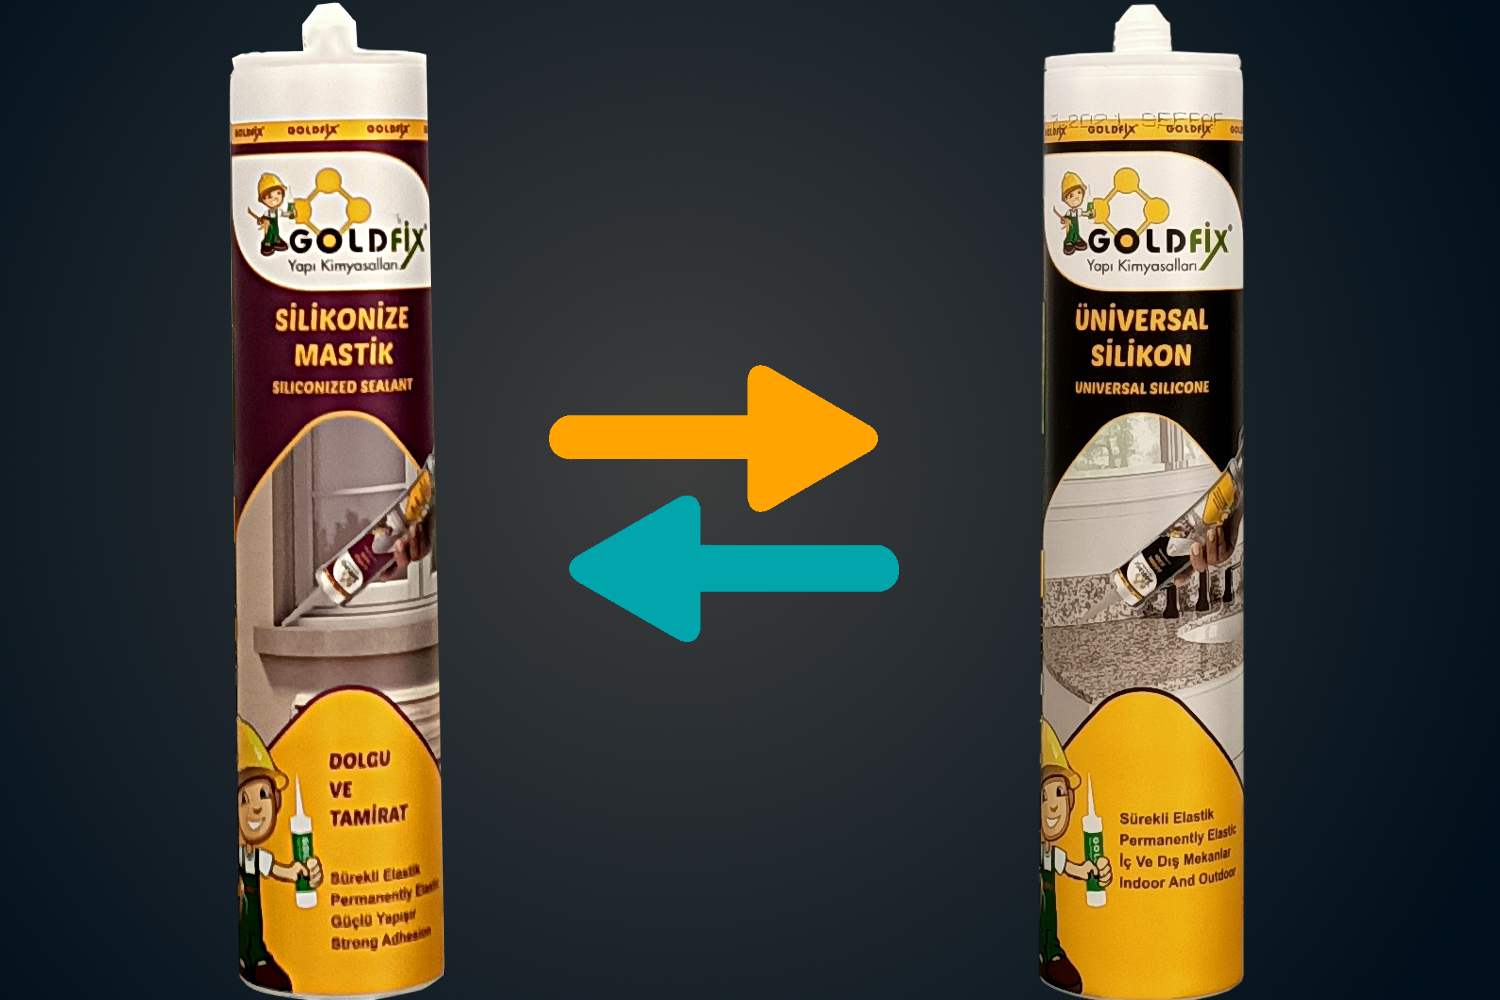 What is Silicone? What is Mastic?